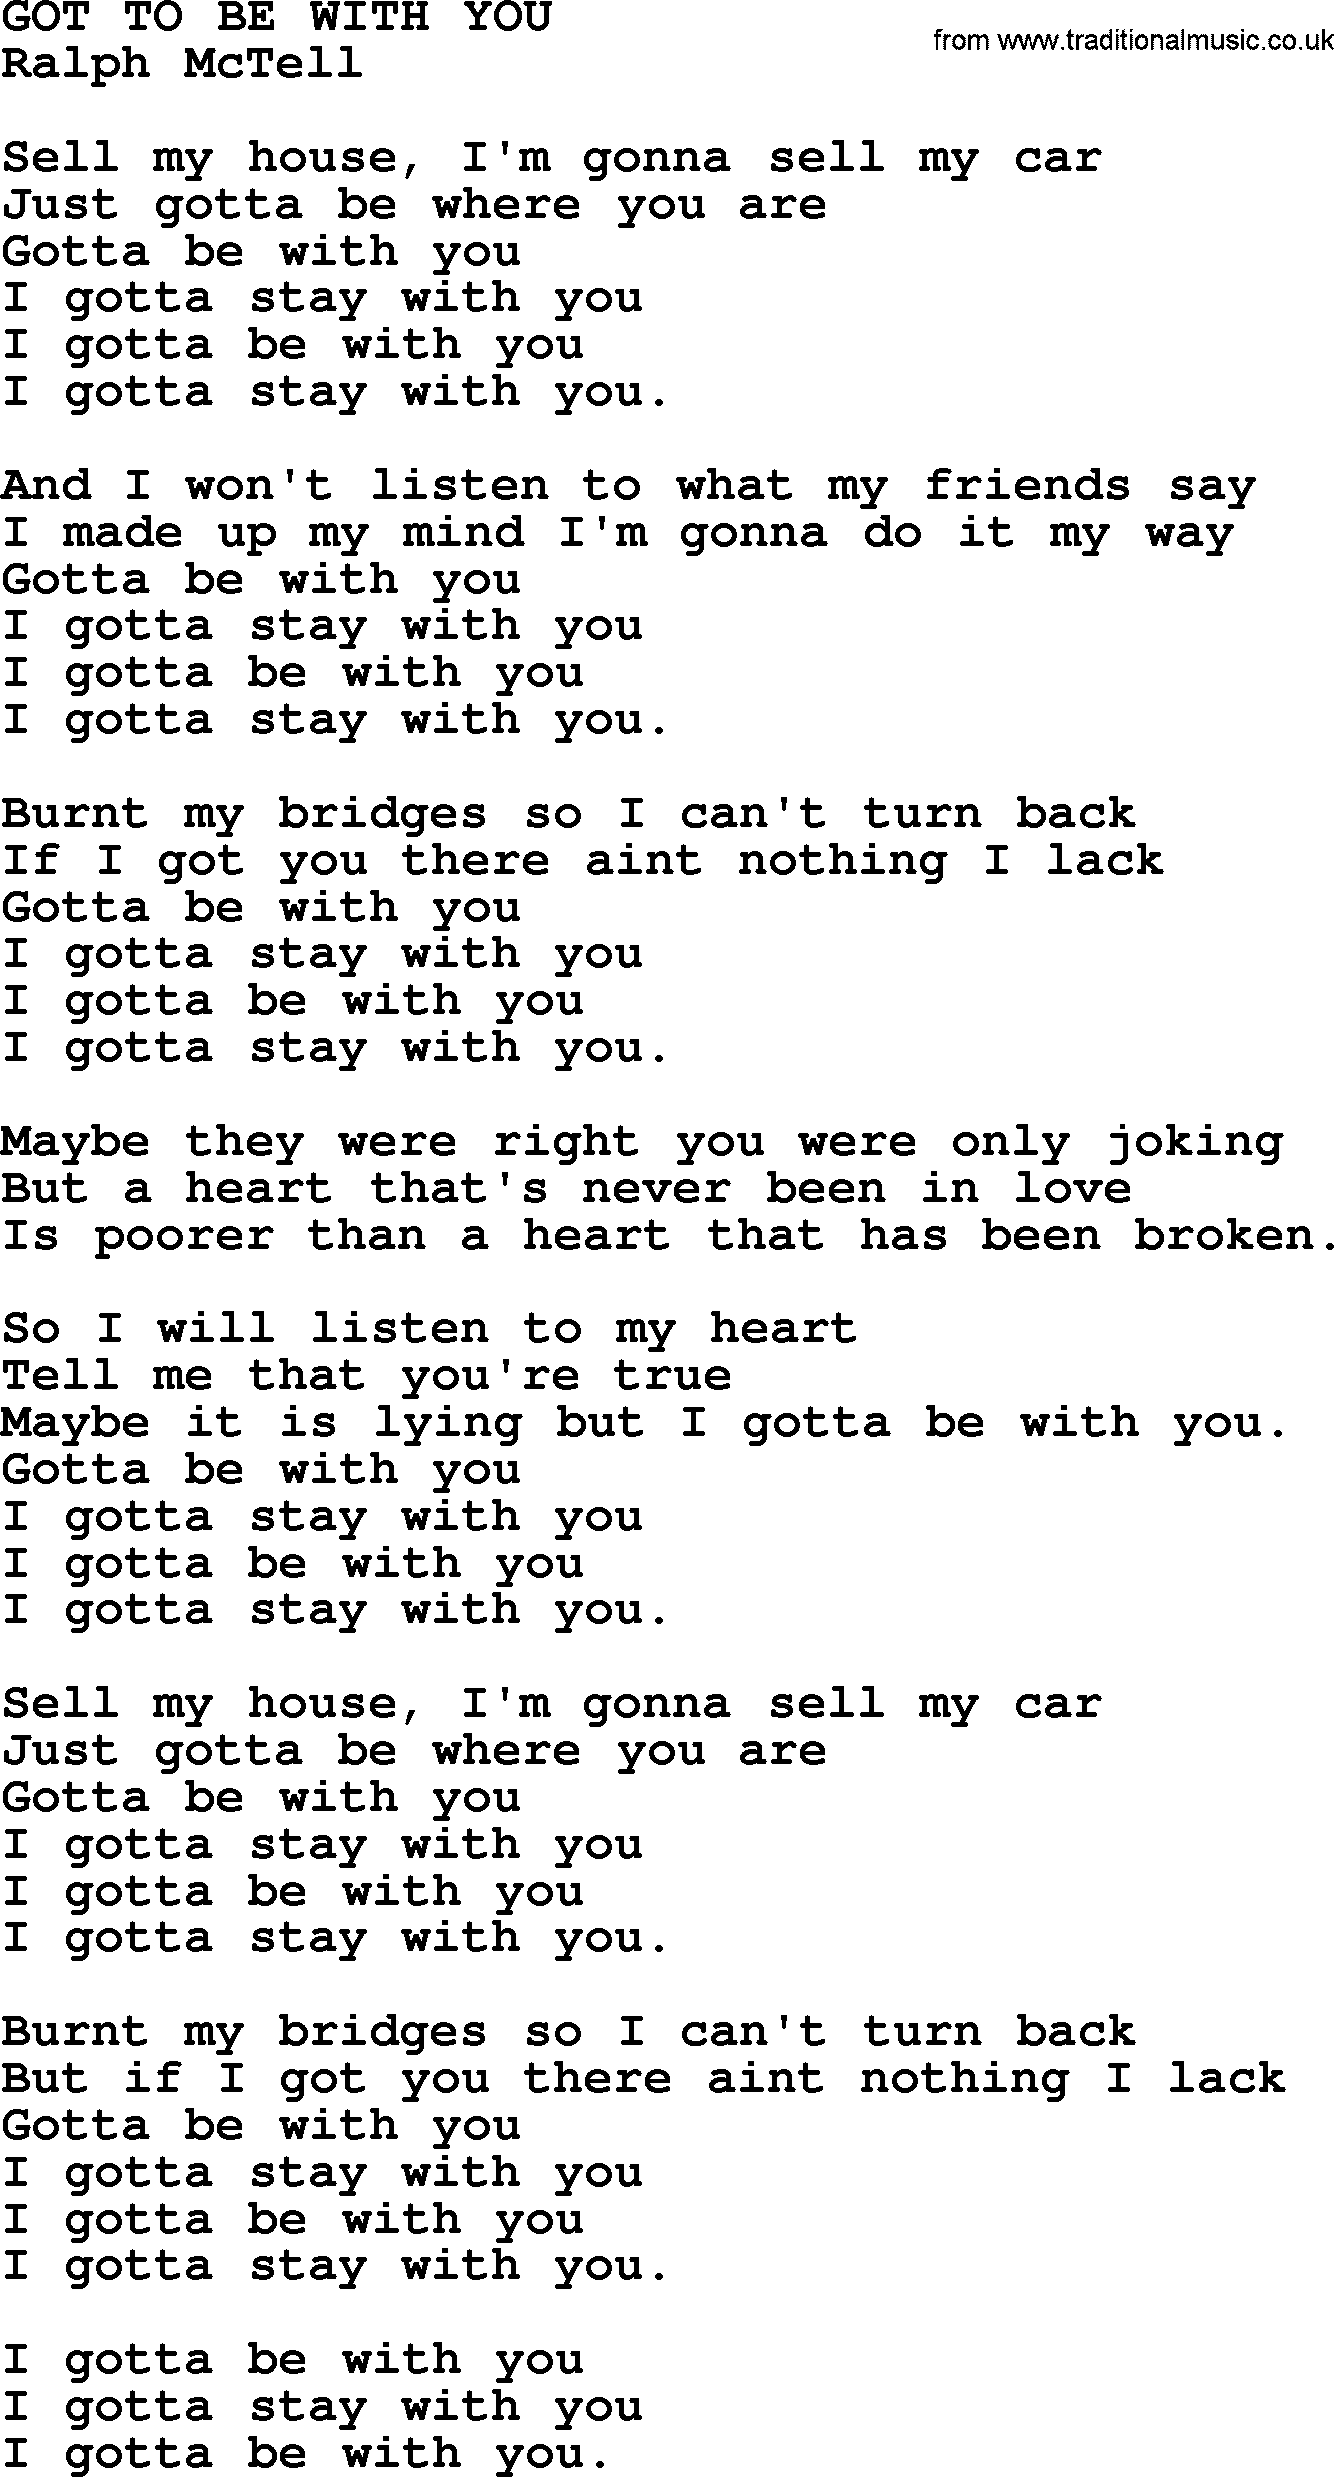 Ralph McTell Song: Got To Be With You, lyrics